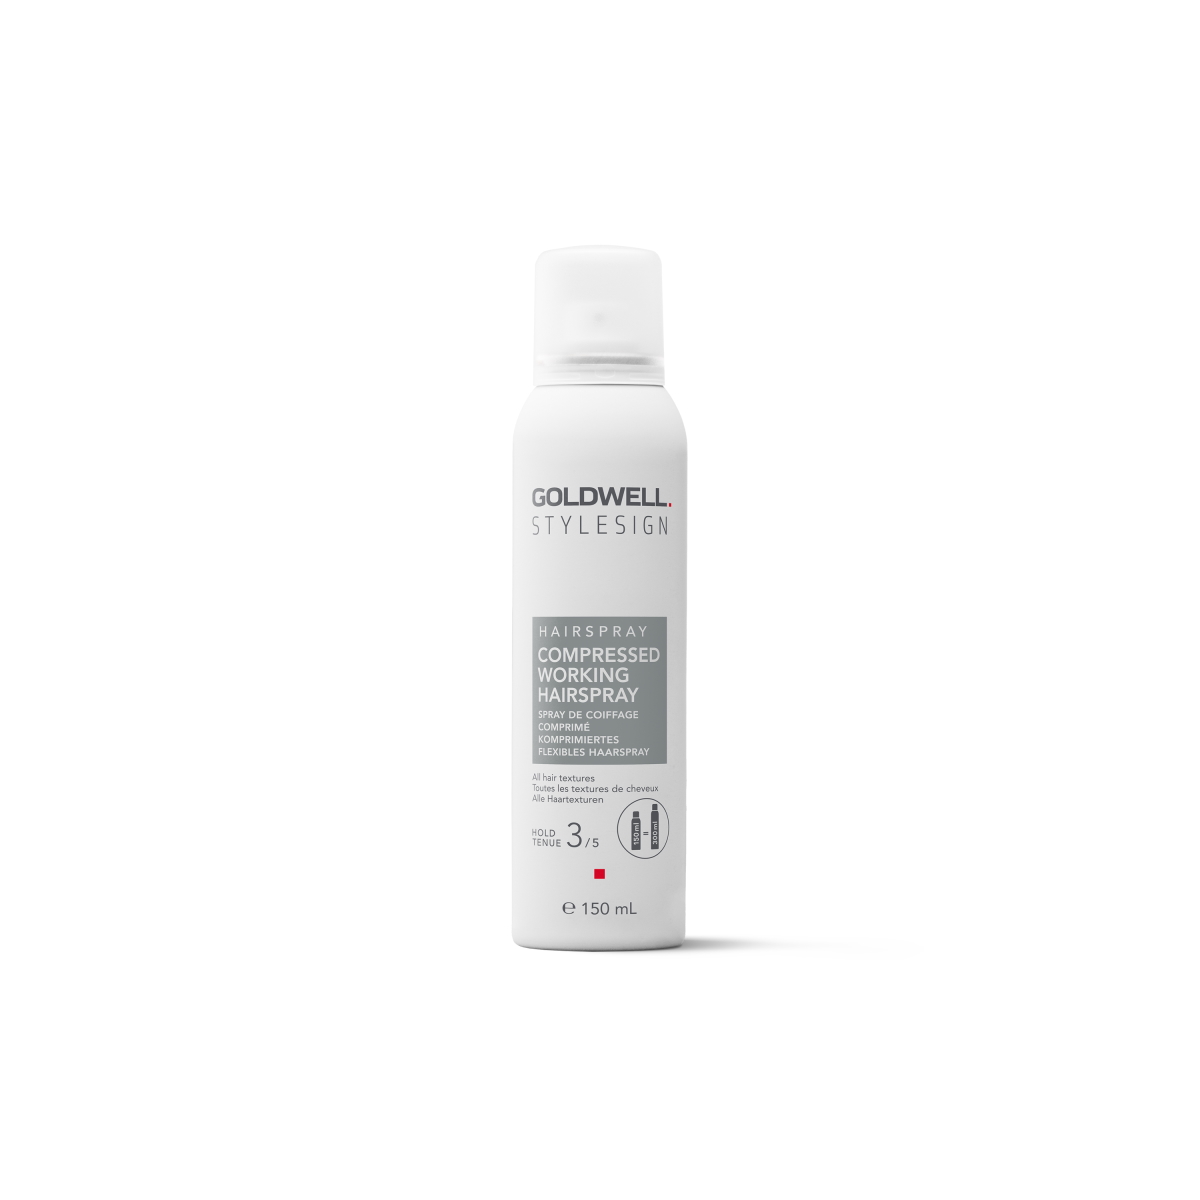 Goldwell Style Sign Hairspray Compressed Working Hairspray 150ml